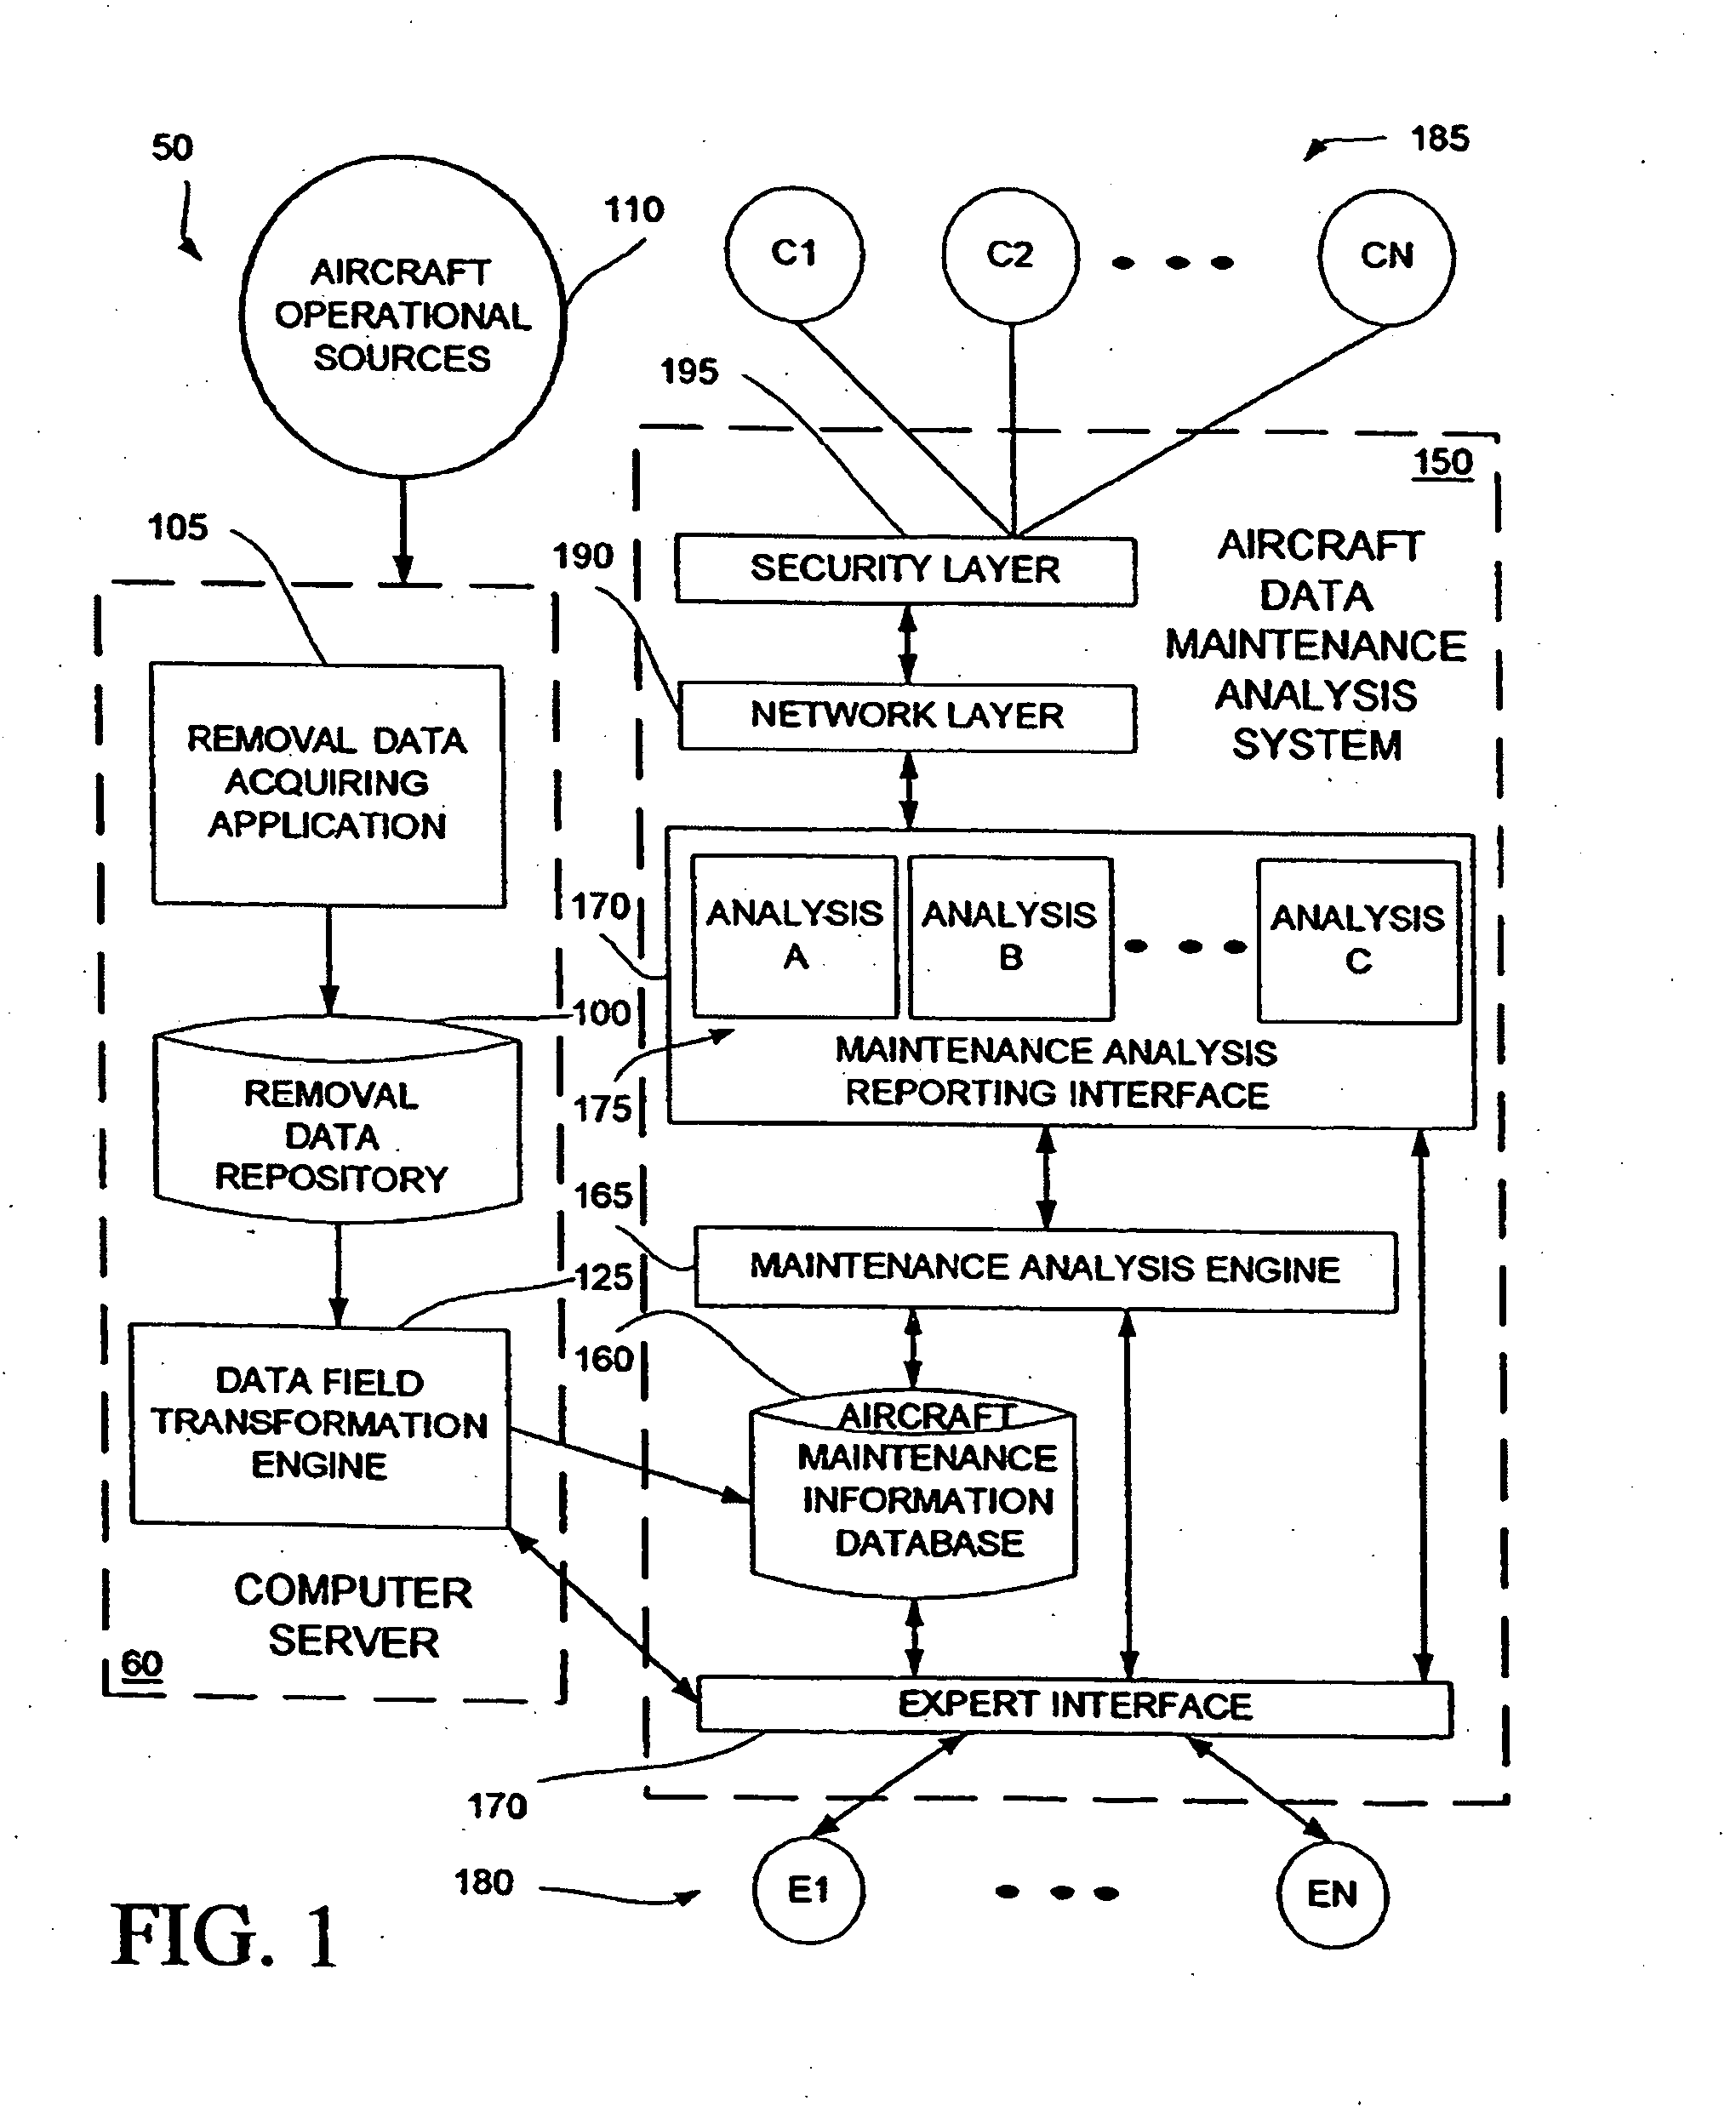 System and method of analyzing aircraft removal data for preventative maintenance